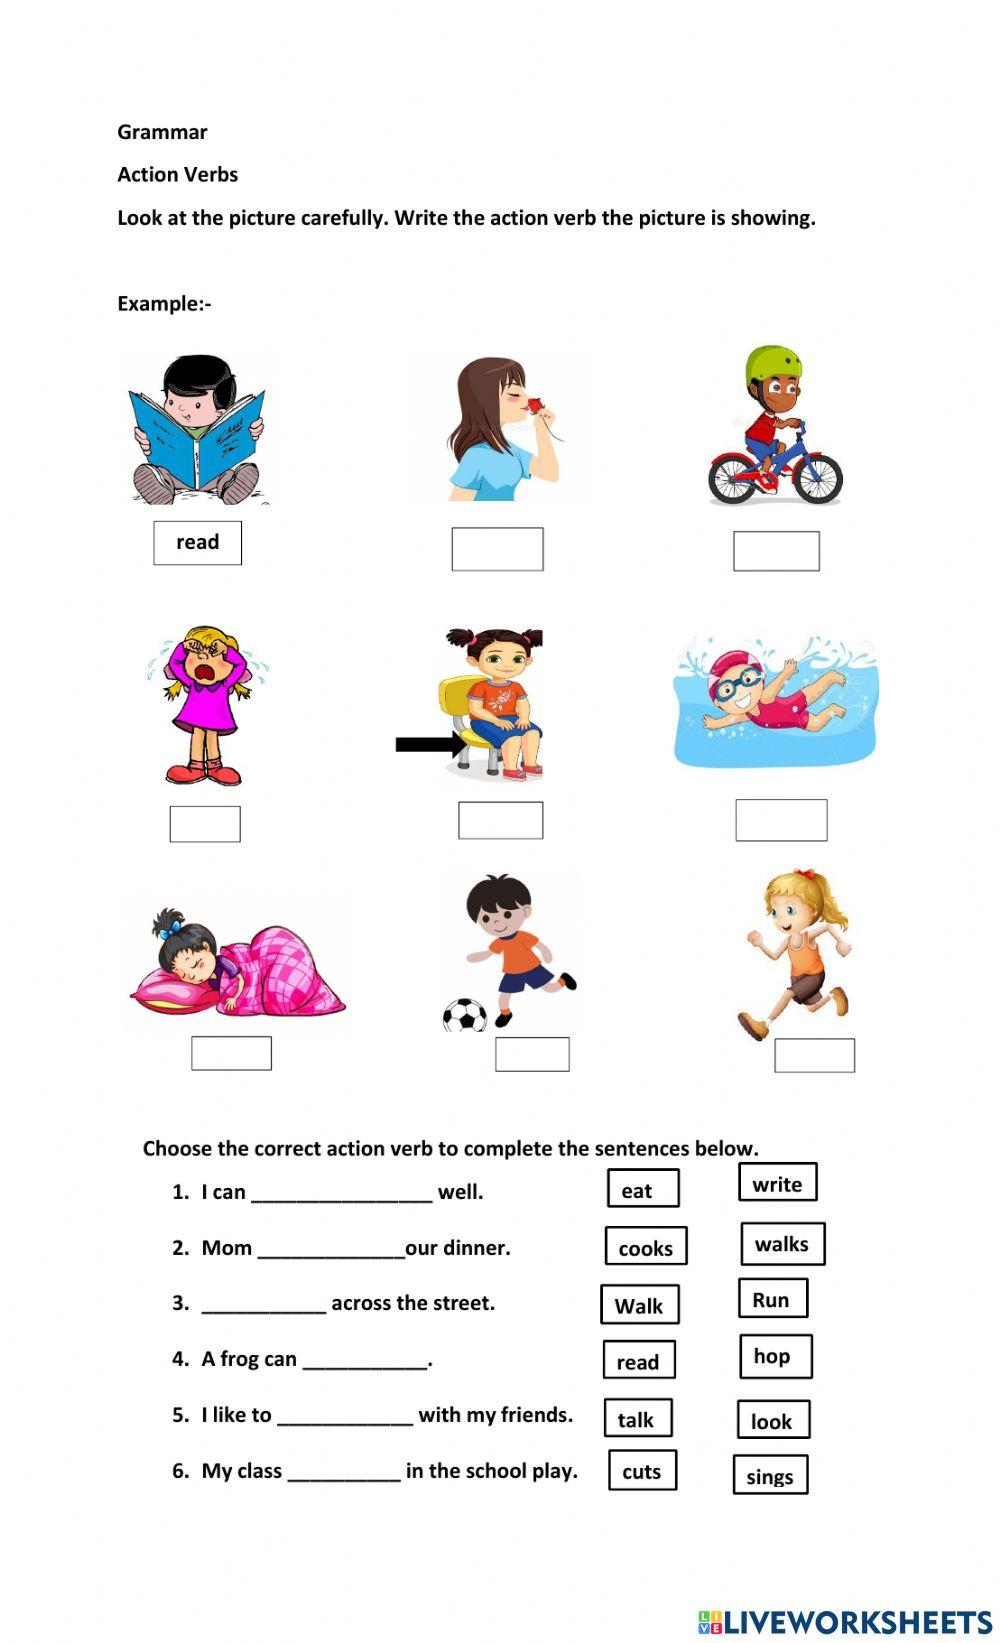 Action Verbs Worksheet For Class 1